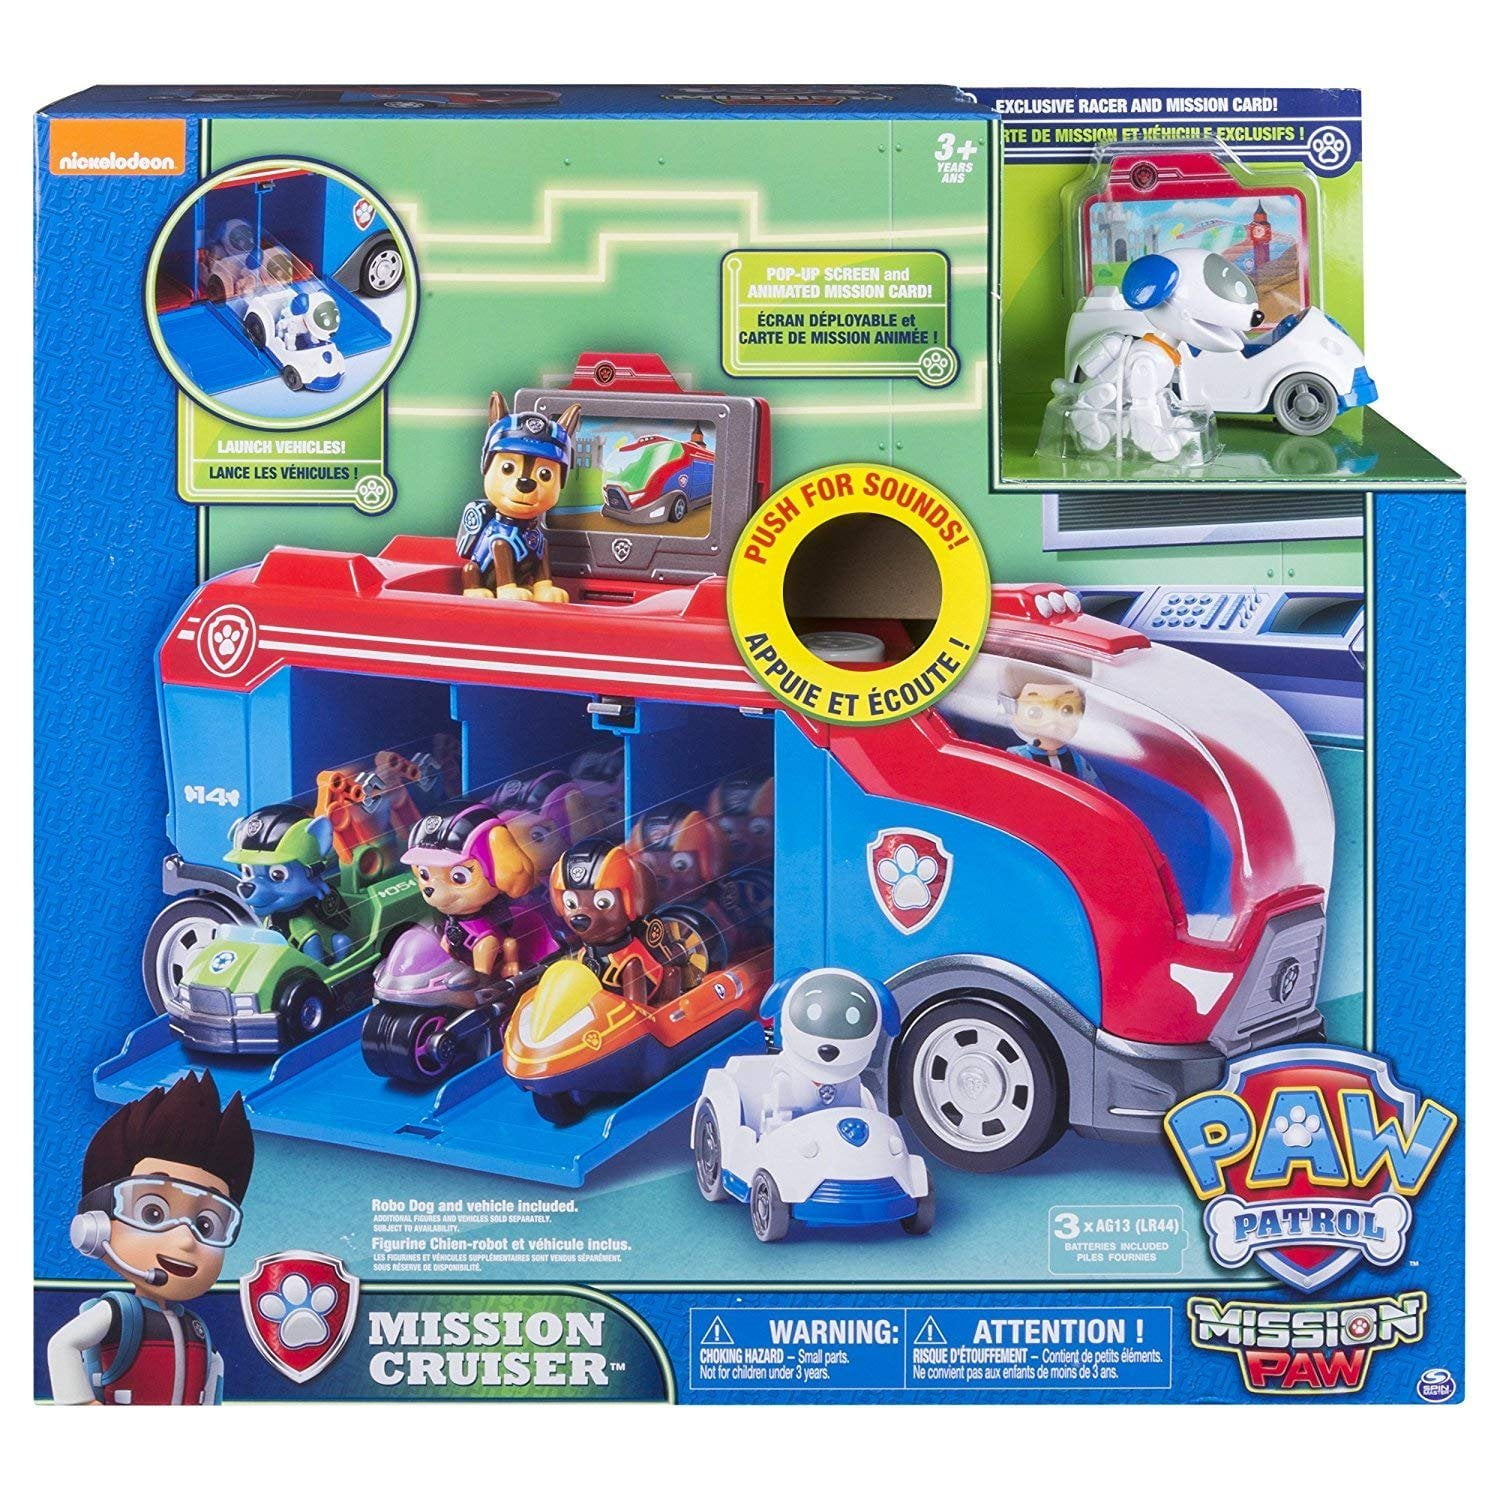 Patrol Mission Cruiser Mission is for ages 3+ and 3 AG13 batteries included Walmart.com